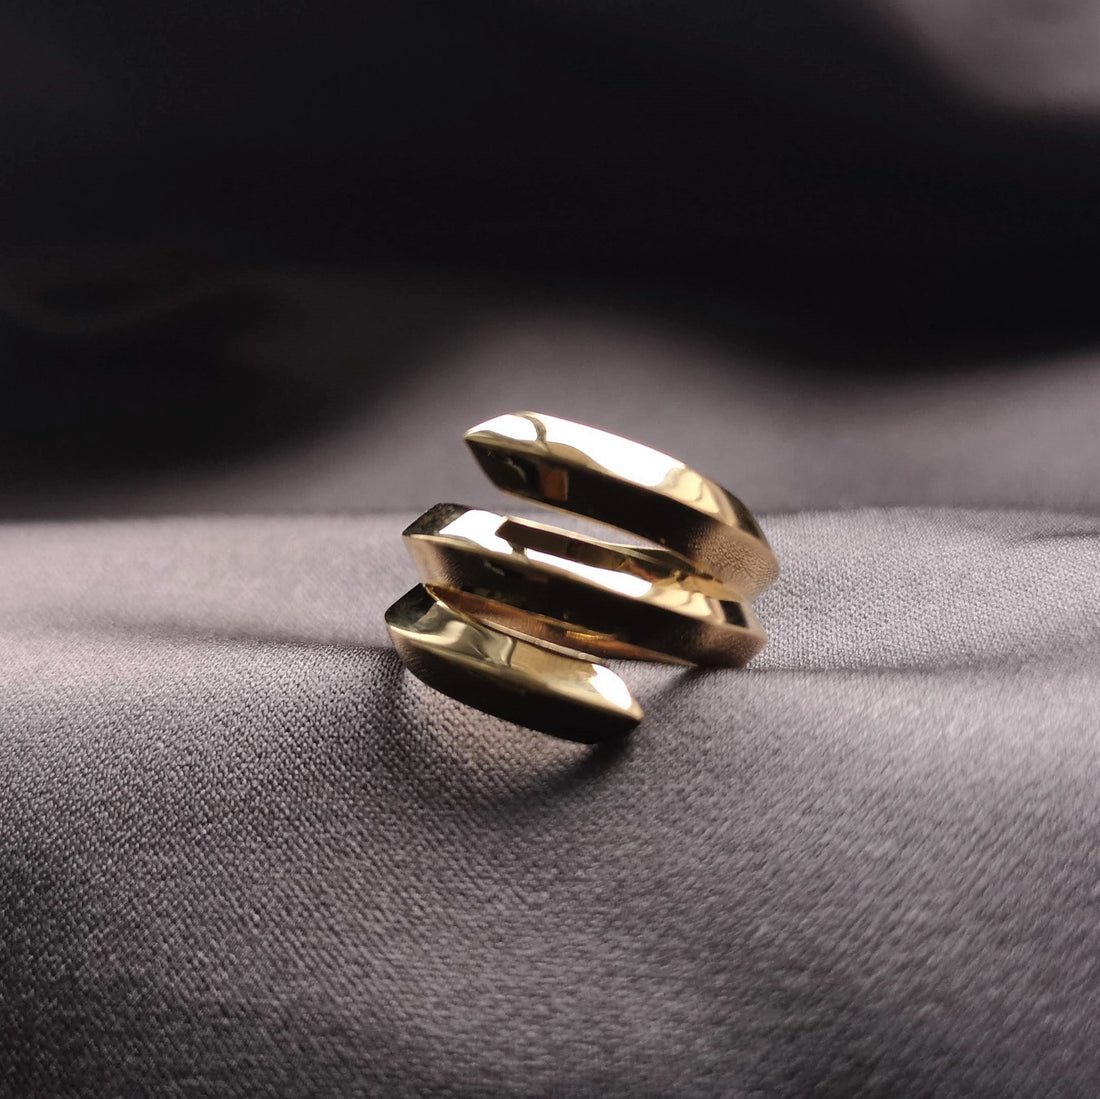 Edgy vermeil gold ring montreal made in canada fine jewelry minimalist bold ring desgin custom made in canada handmade fine jewelry